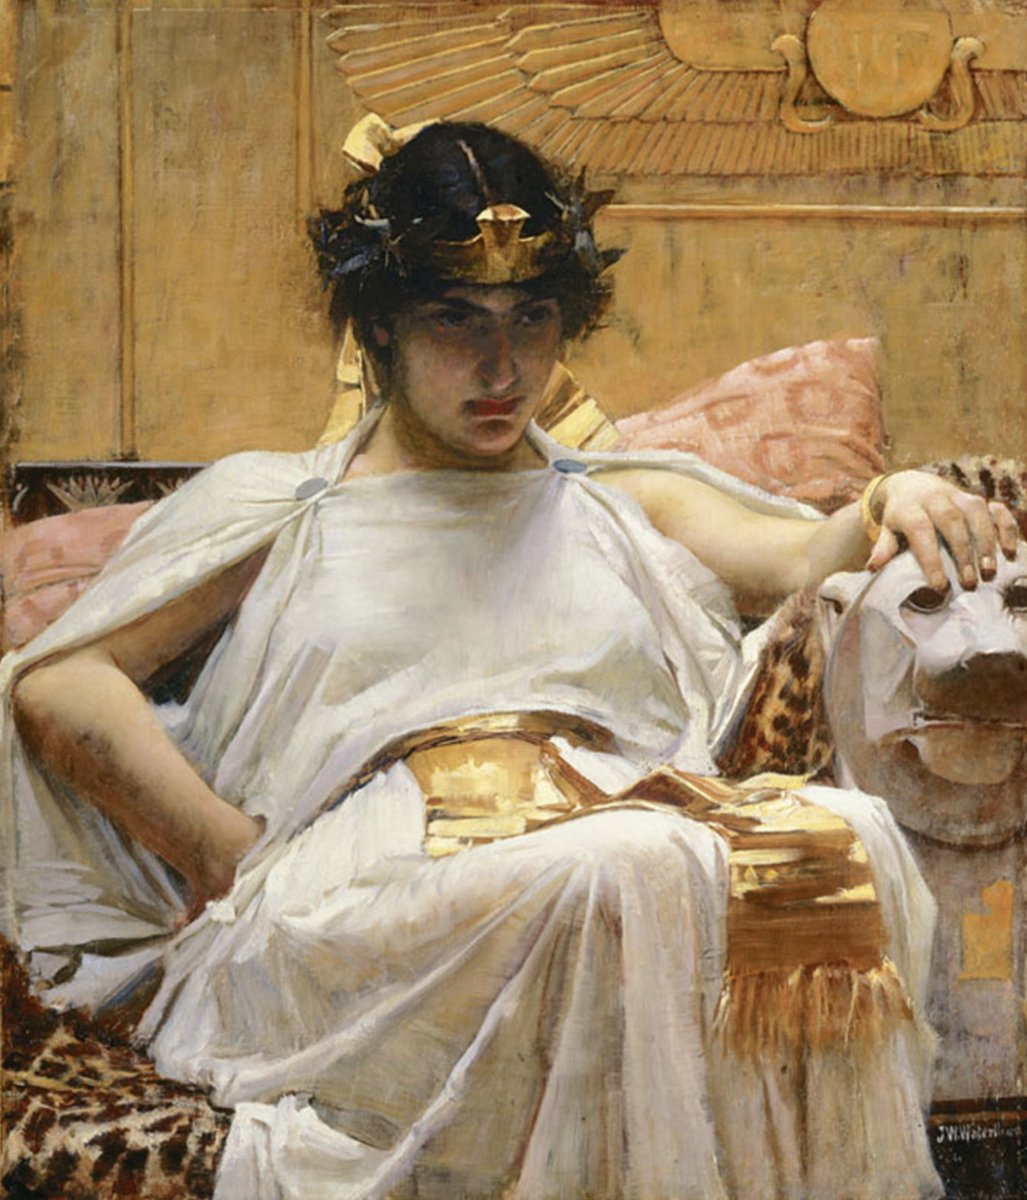 This week's @artukdotorg #OnlineArtExchange theme is Egypt, in honour of Creatures of the Nile at @VictoriaGallery curated by @GarstangMuseum Cleopatra by JW Waterhouse (1888, Private Collection)